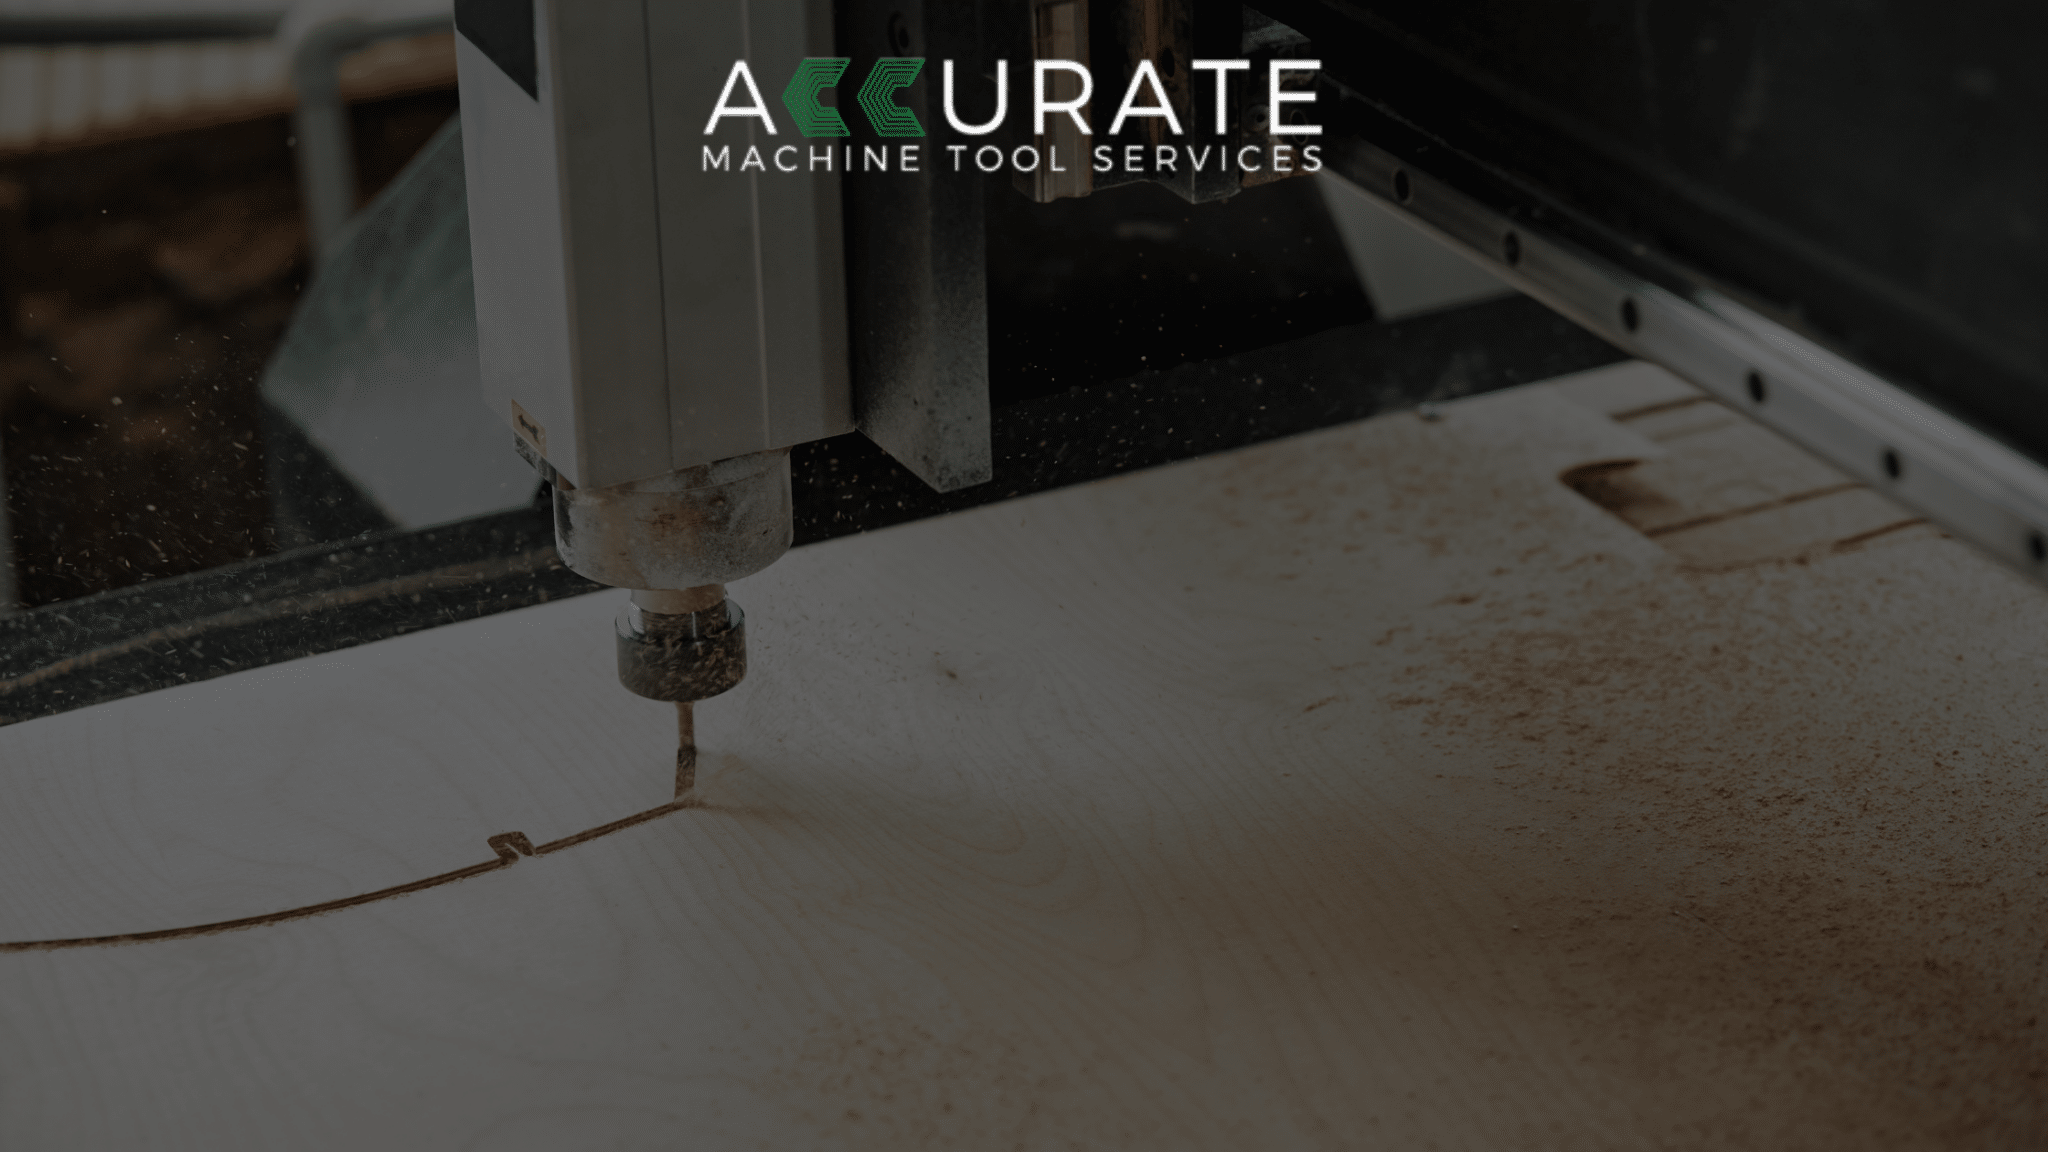 A precise cut is made made by a CNC machine to demonstrate the cnc solutions available in shops.